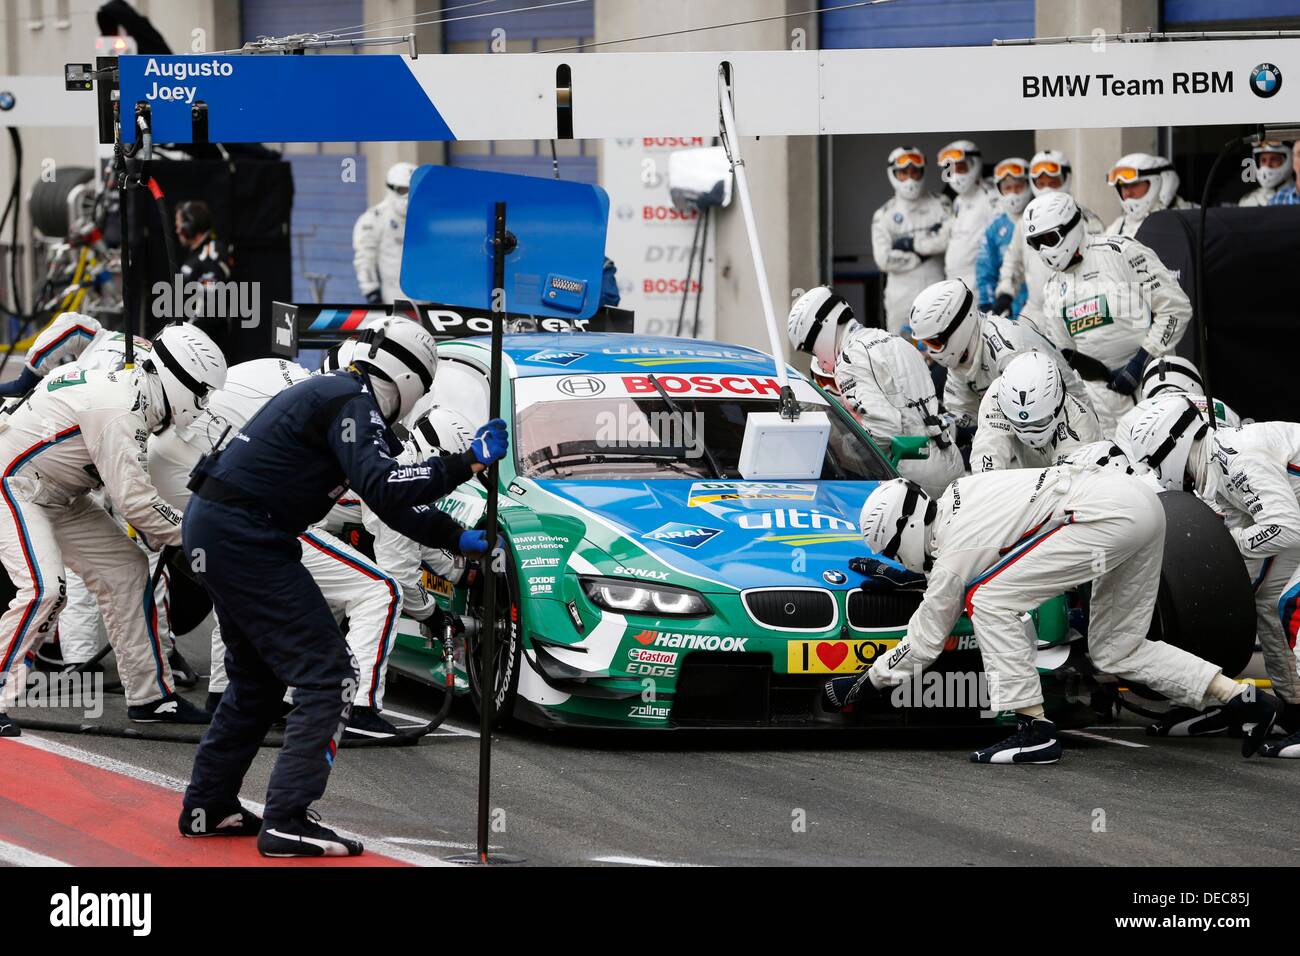 (HANDOUT) A handout photo released by Hoch Zwei on 15 September 2013 shows the Brazilian BMW-pilot Augusto Farfus during the pit stopp at the 8th race of the DTM in Oschersleben, Germany. Stock Photo